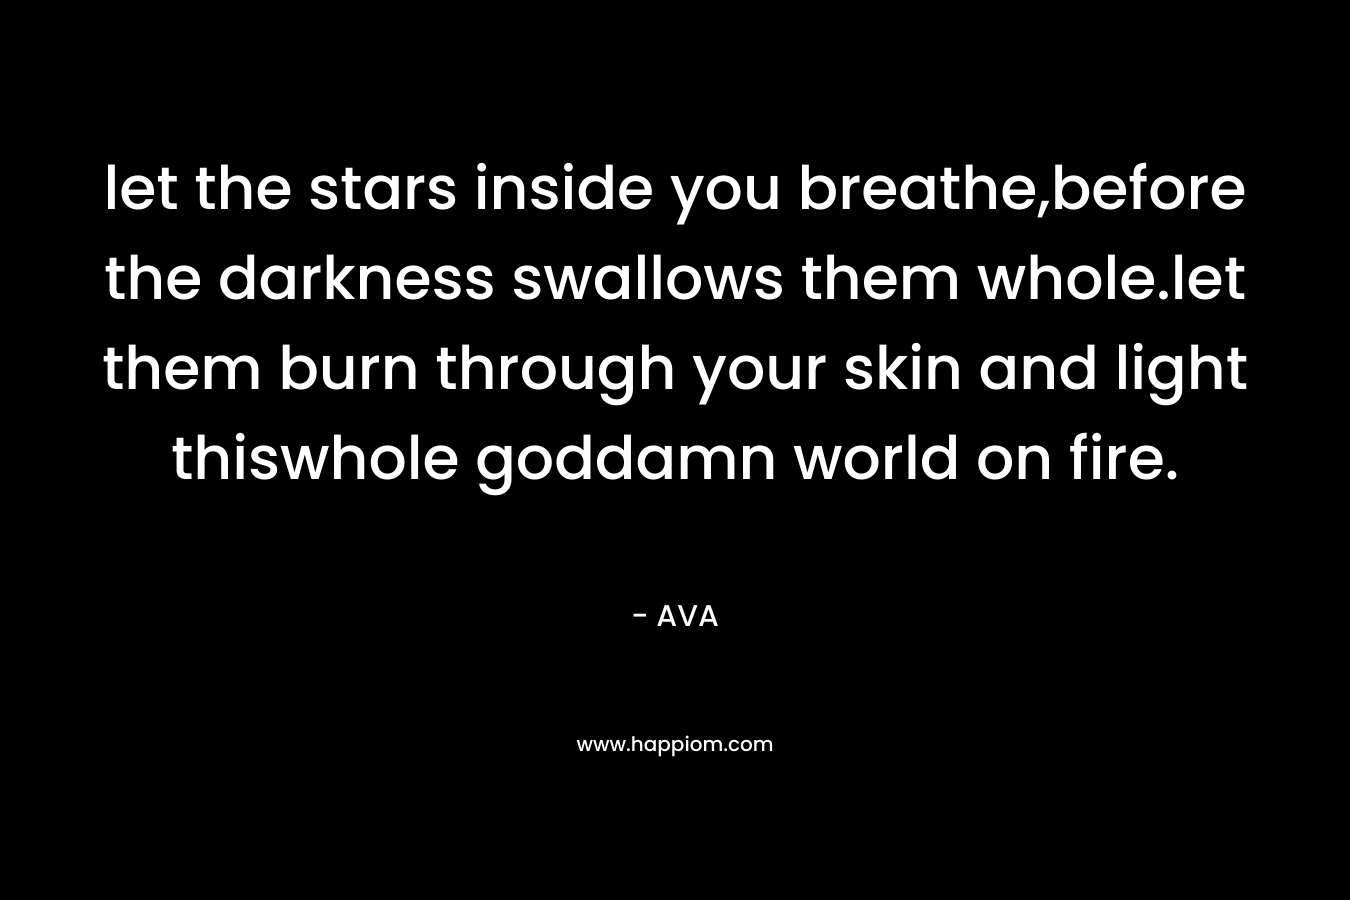 let the stars inside you breathe,before the darkness swallows them whole.let them burn through your skin and light thiswhole goddamn world on fire. – AVA